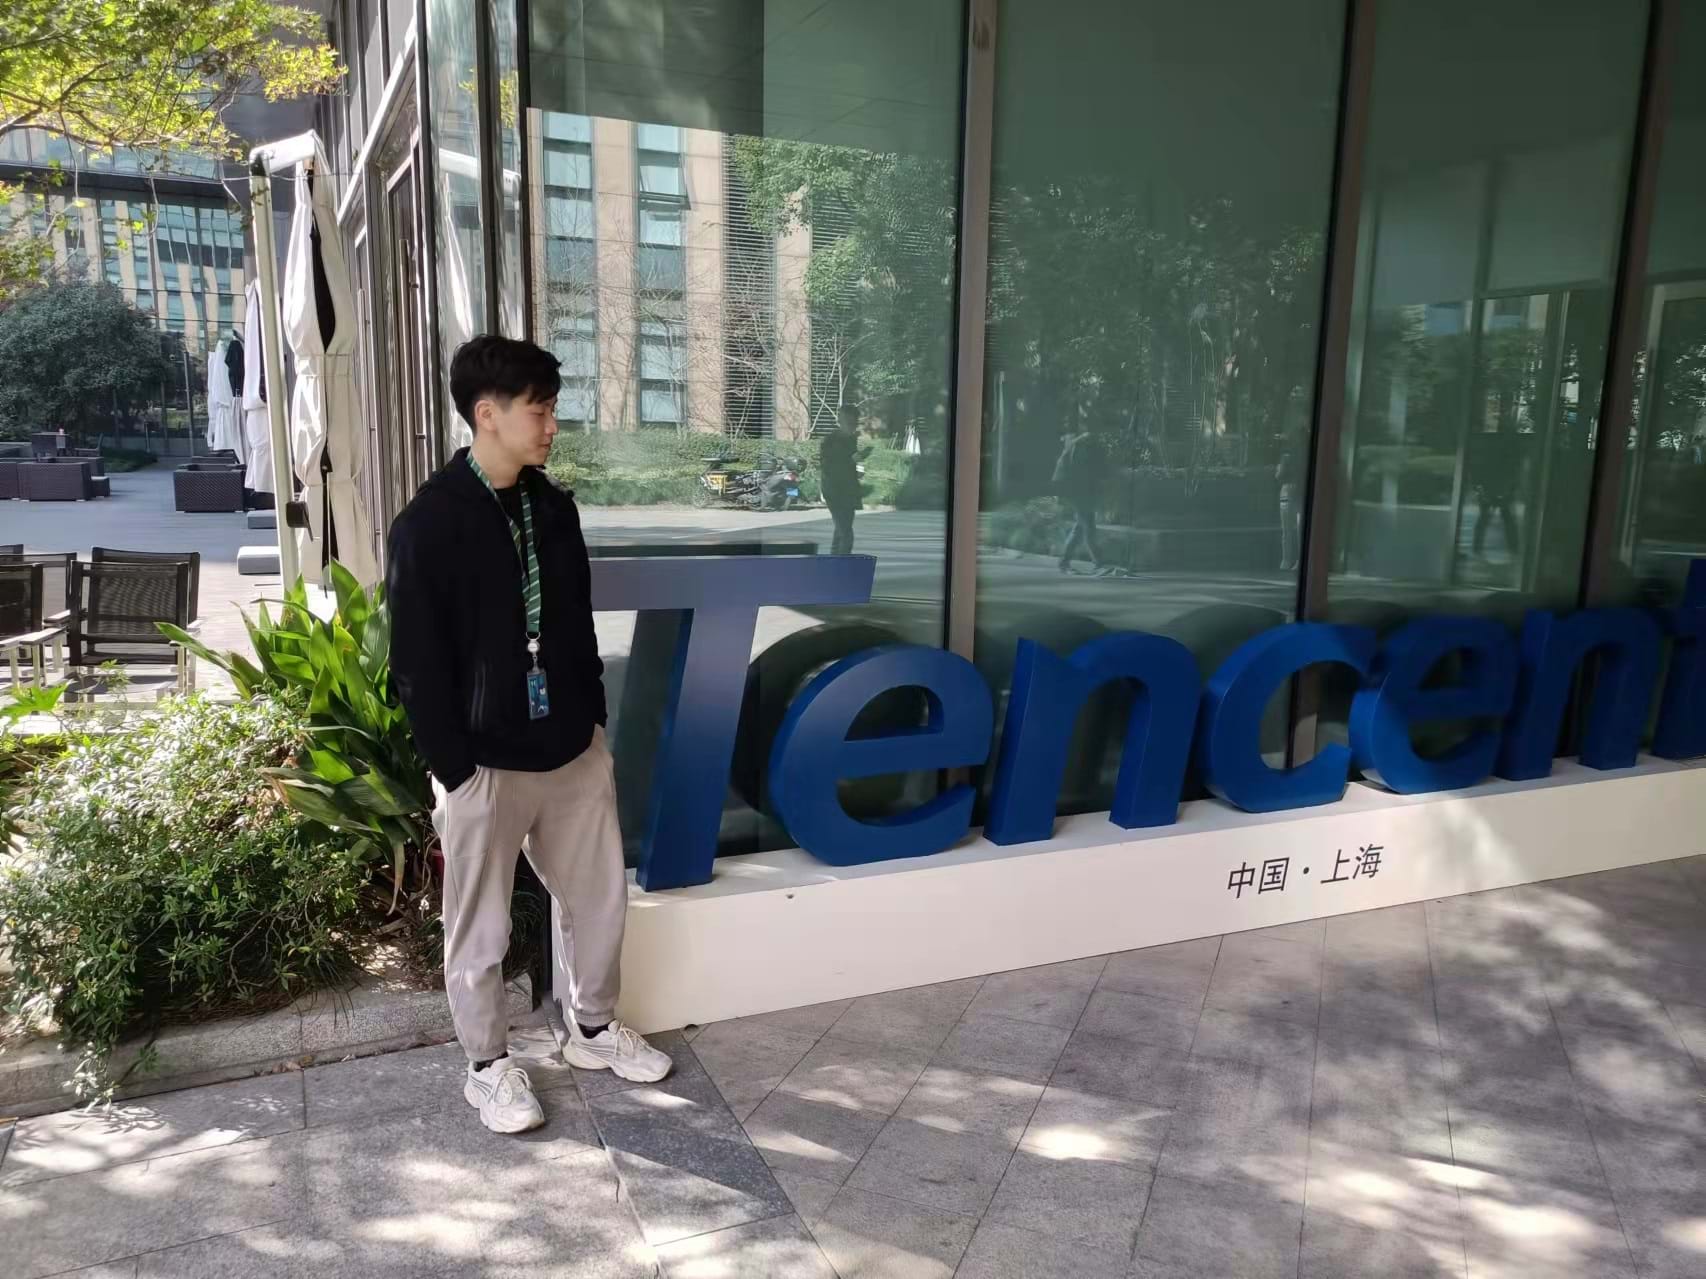 The image shows Nathan Zheng outside of his office at Chinese company Tencent